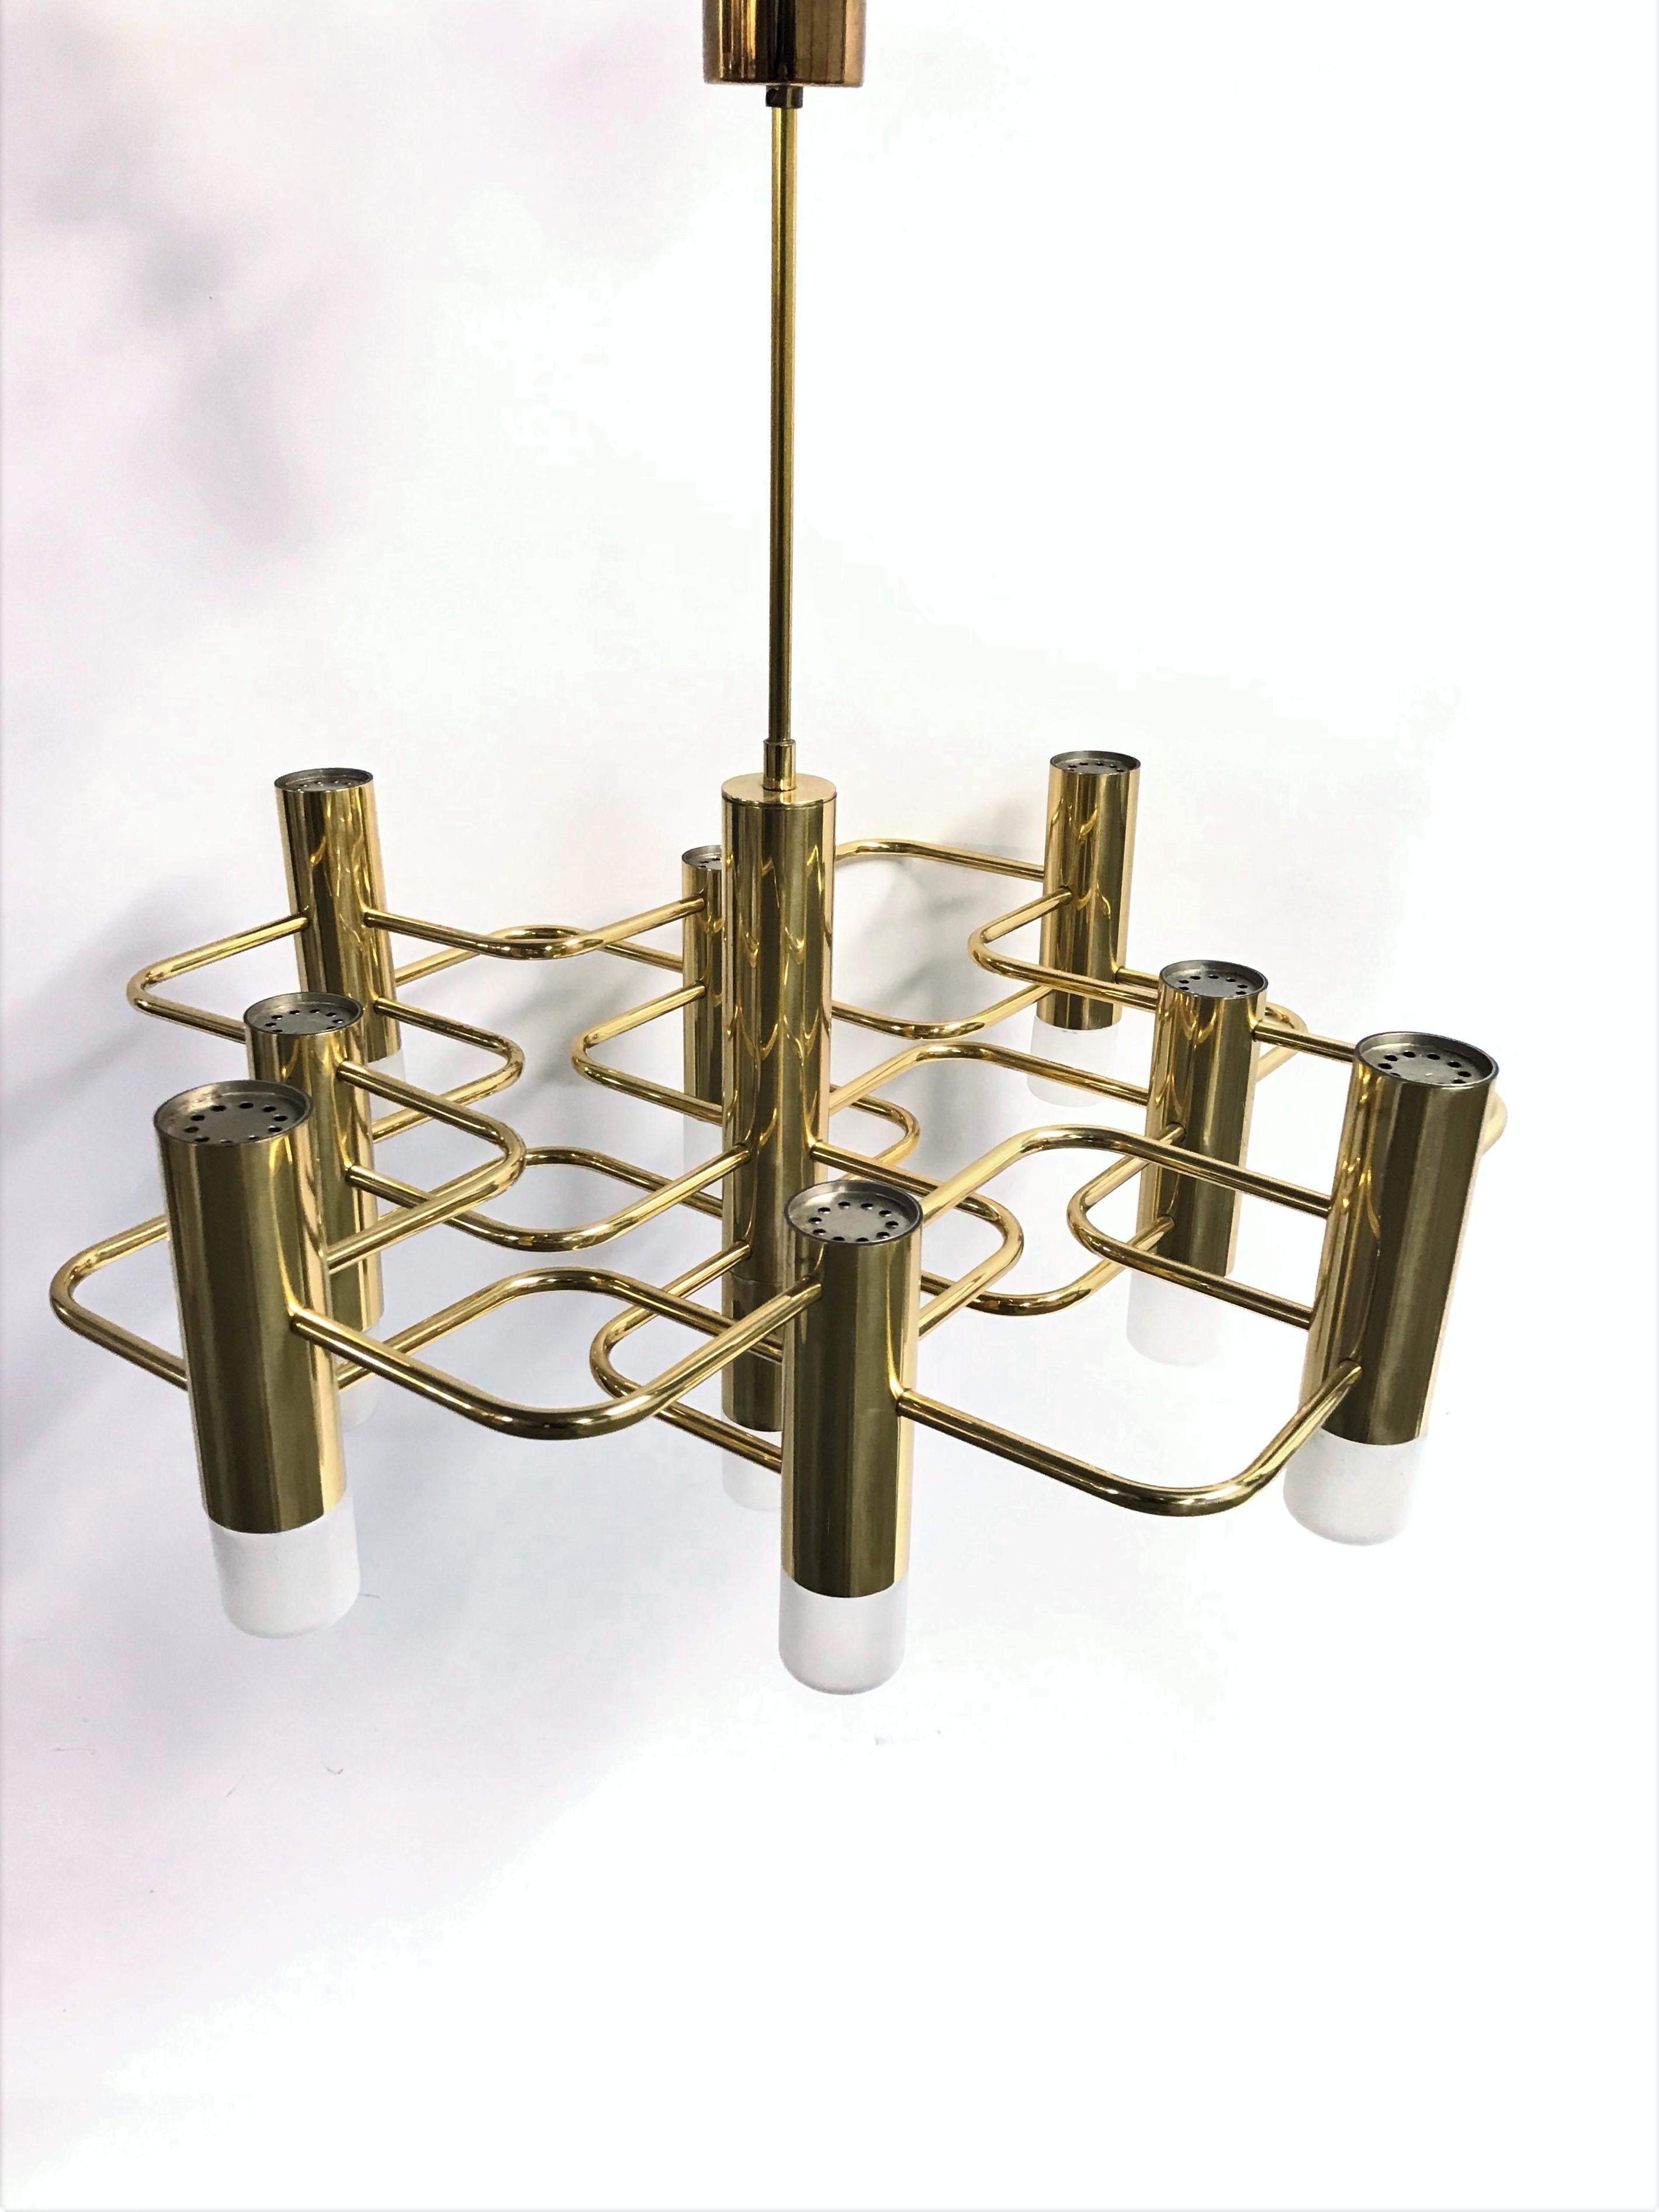 Midcentury sciolari chandelier with 9-light points

Sculptural brass sciolari chandelier for boulanger with 9-light points.

The chandelier is in very good condition and in full working order.

Slightly patinated brass.

Tested and ready for